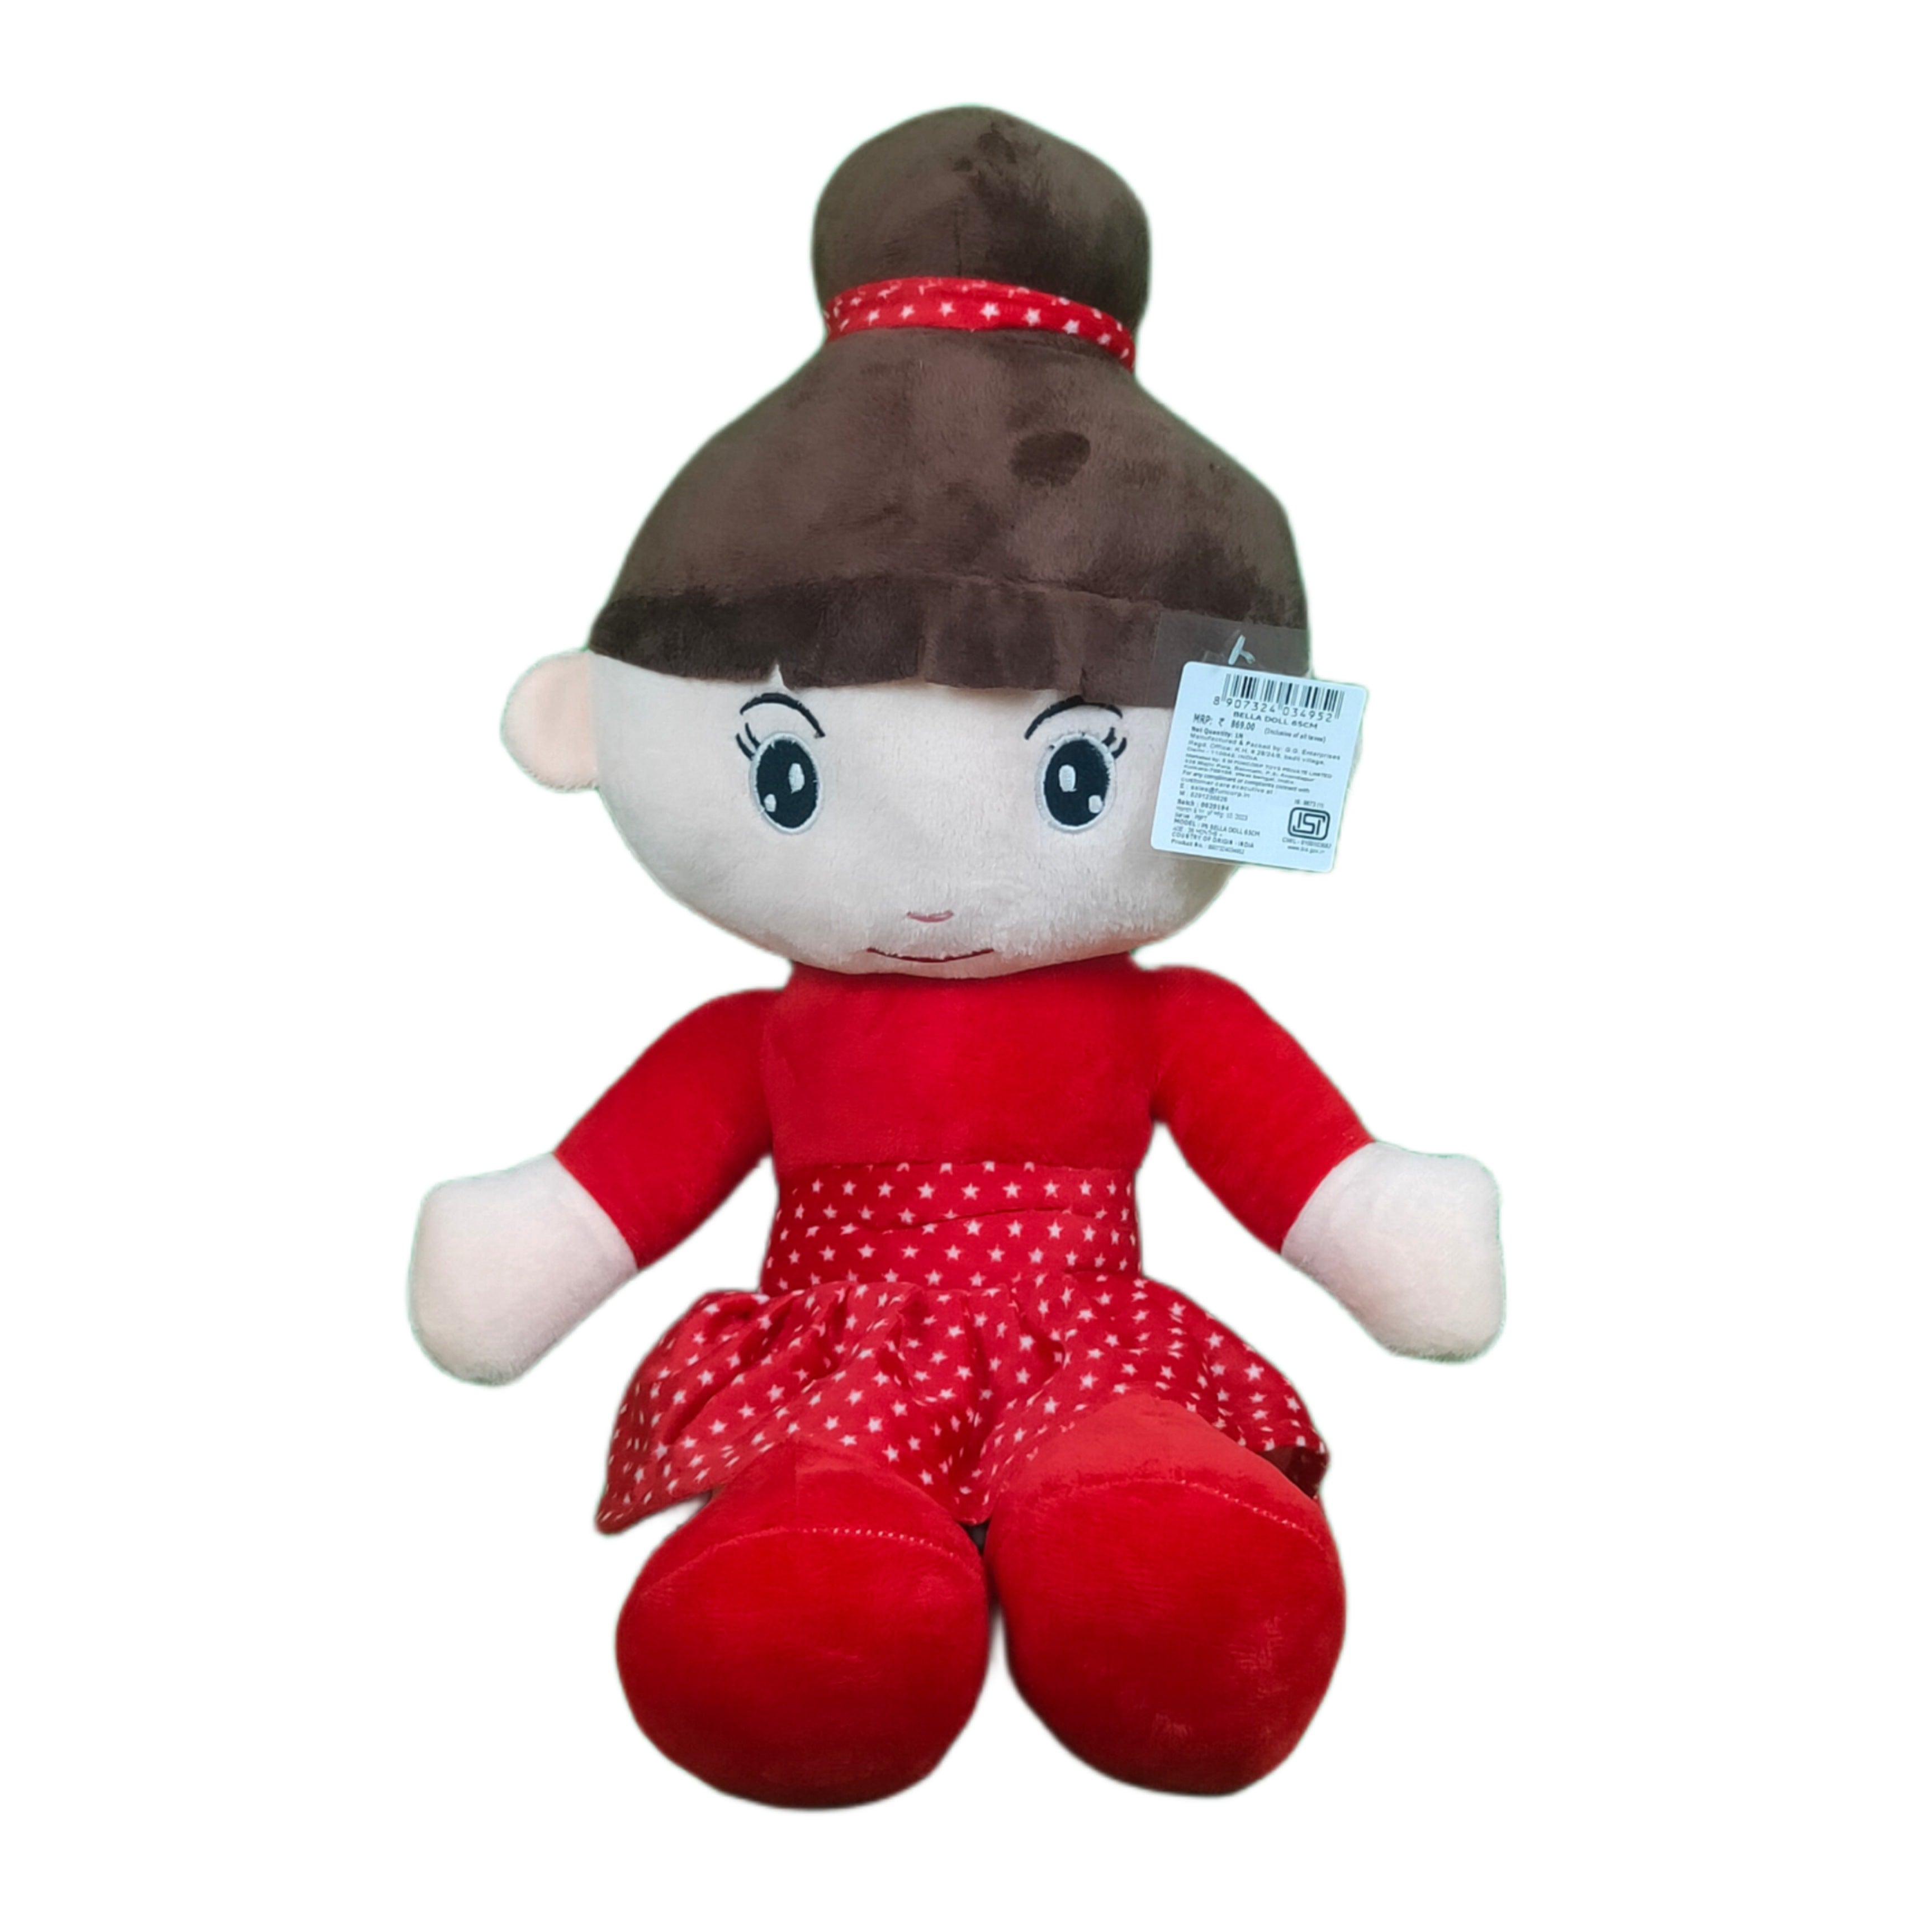 Play Hour Bella Rag Doll Plush Soft Toy Wearing Red Polka Dot Frock for Ages 3 Years and Up, 65cm